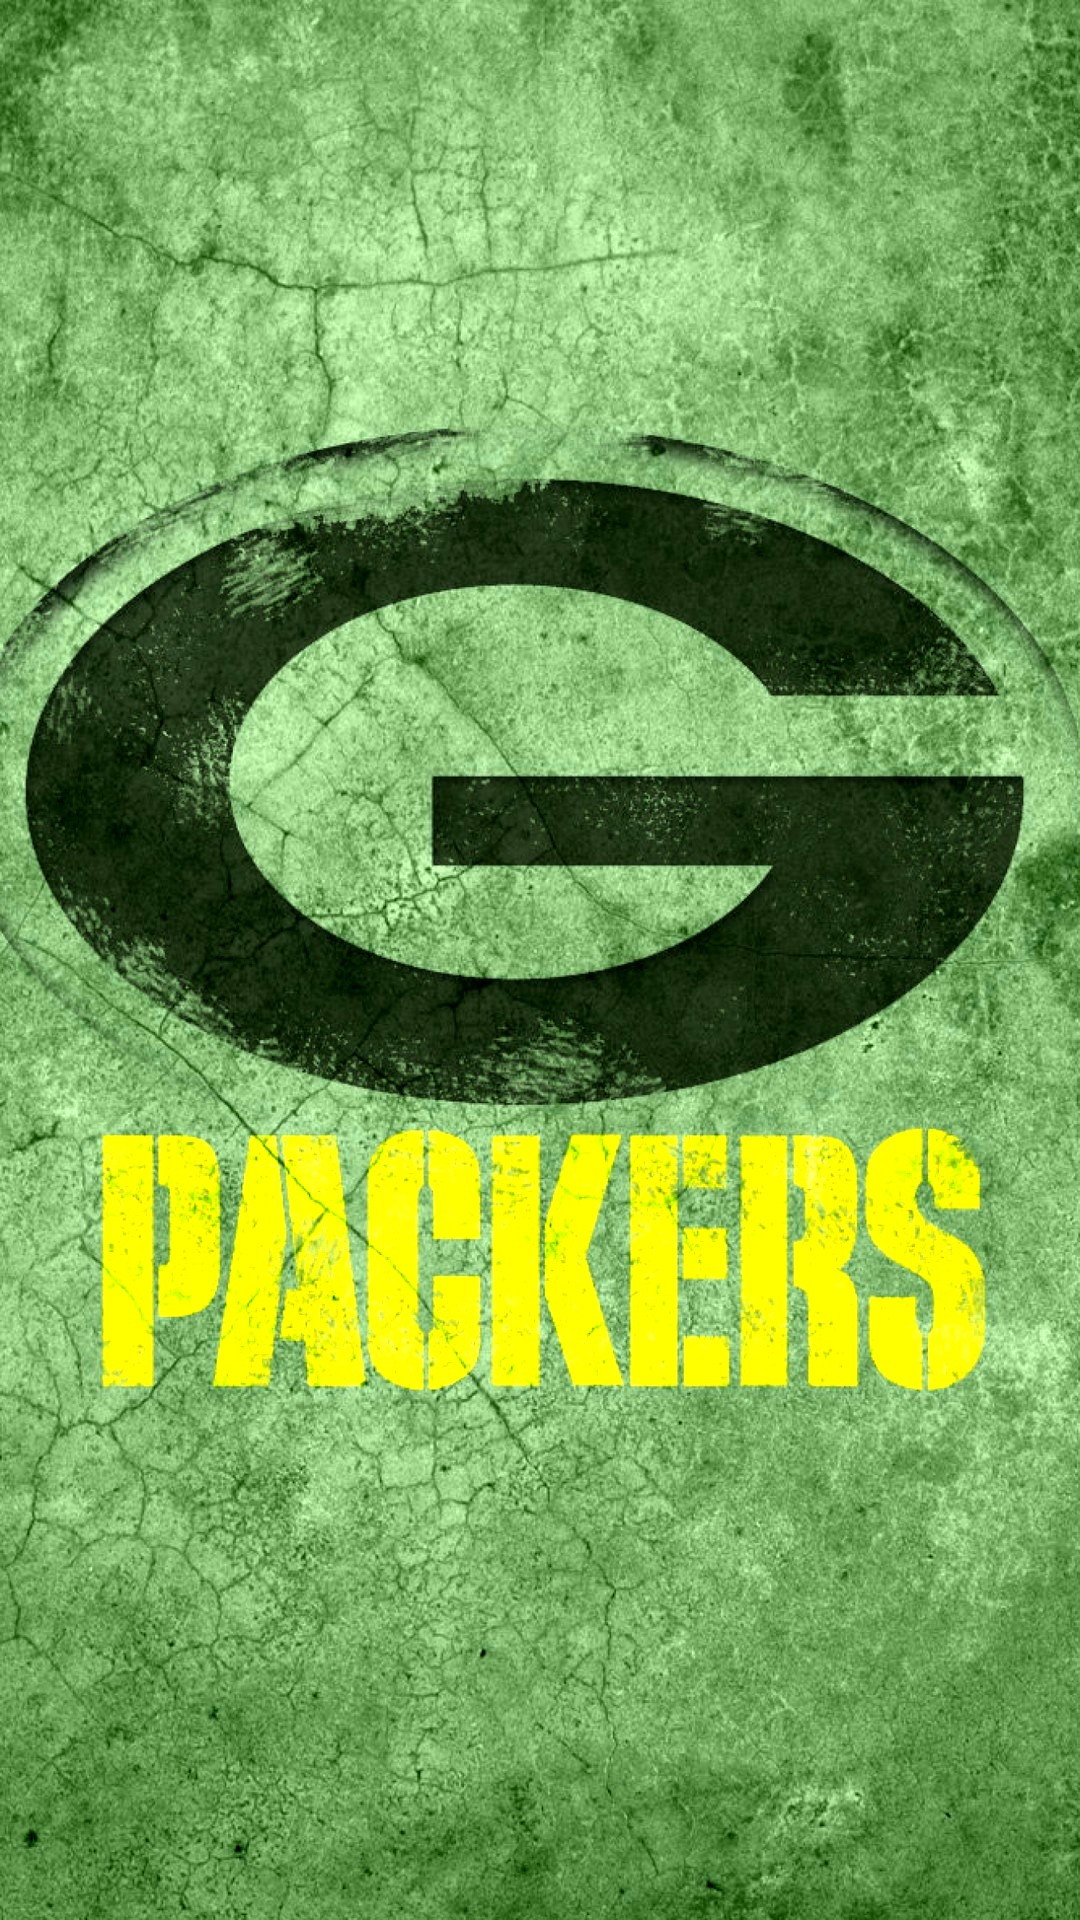 Green Bay Packers Wallpapers in HD with high-resolution 1080x1920 pixel. You can use and set as wallpaper for Notebook Screensavers, Mac Wallpapers, Mobile Home Screen, iPhone or Android Phones Lock Screen